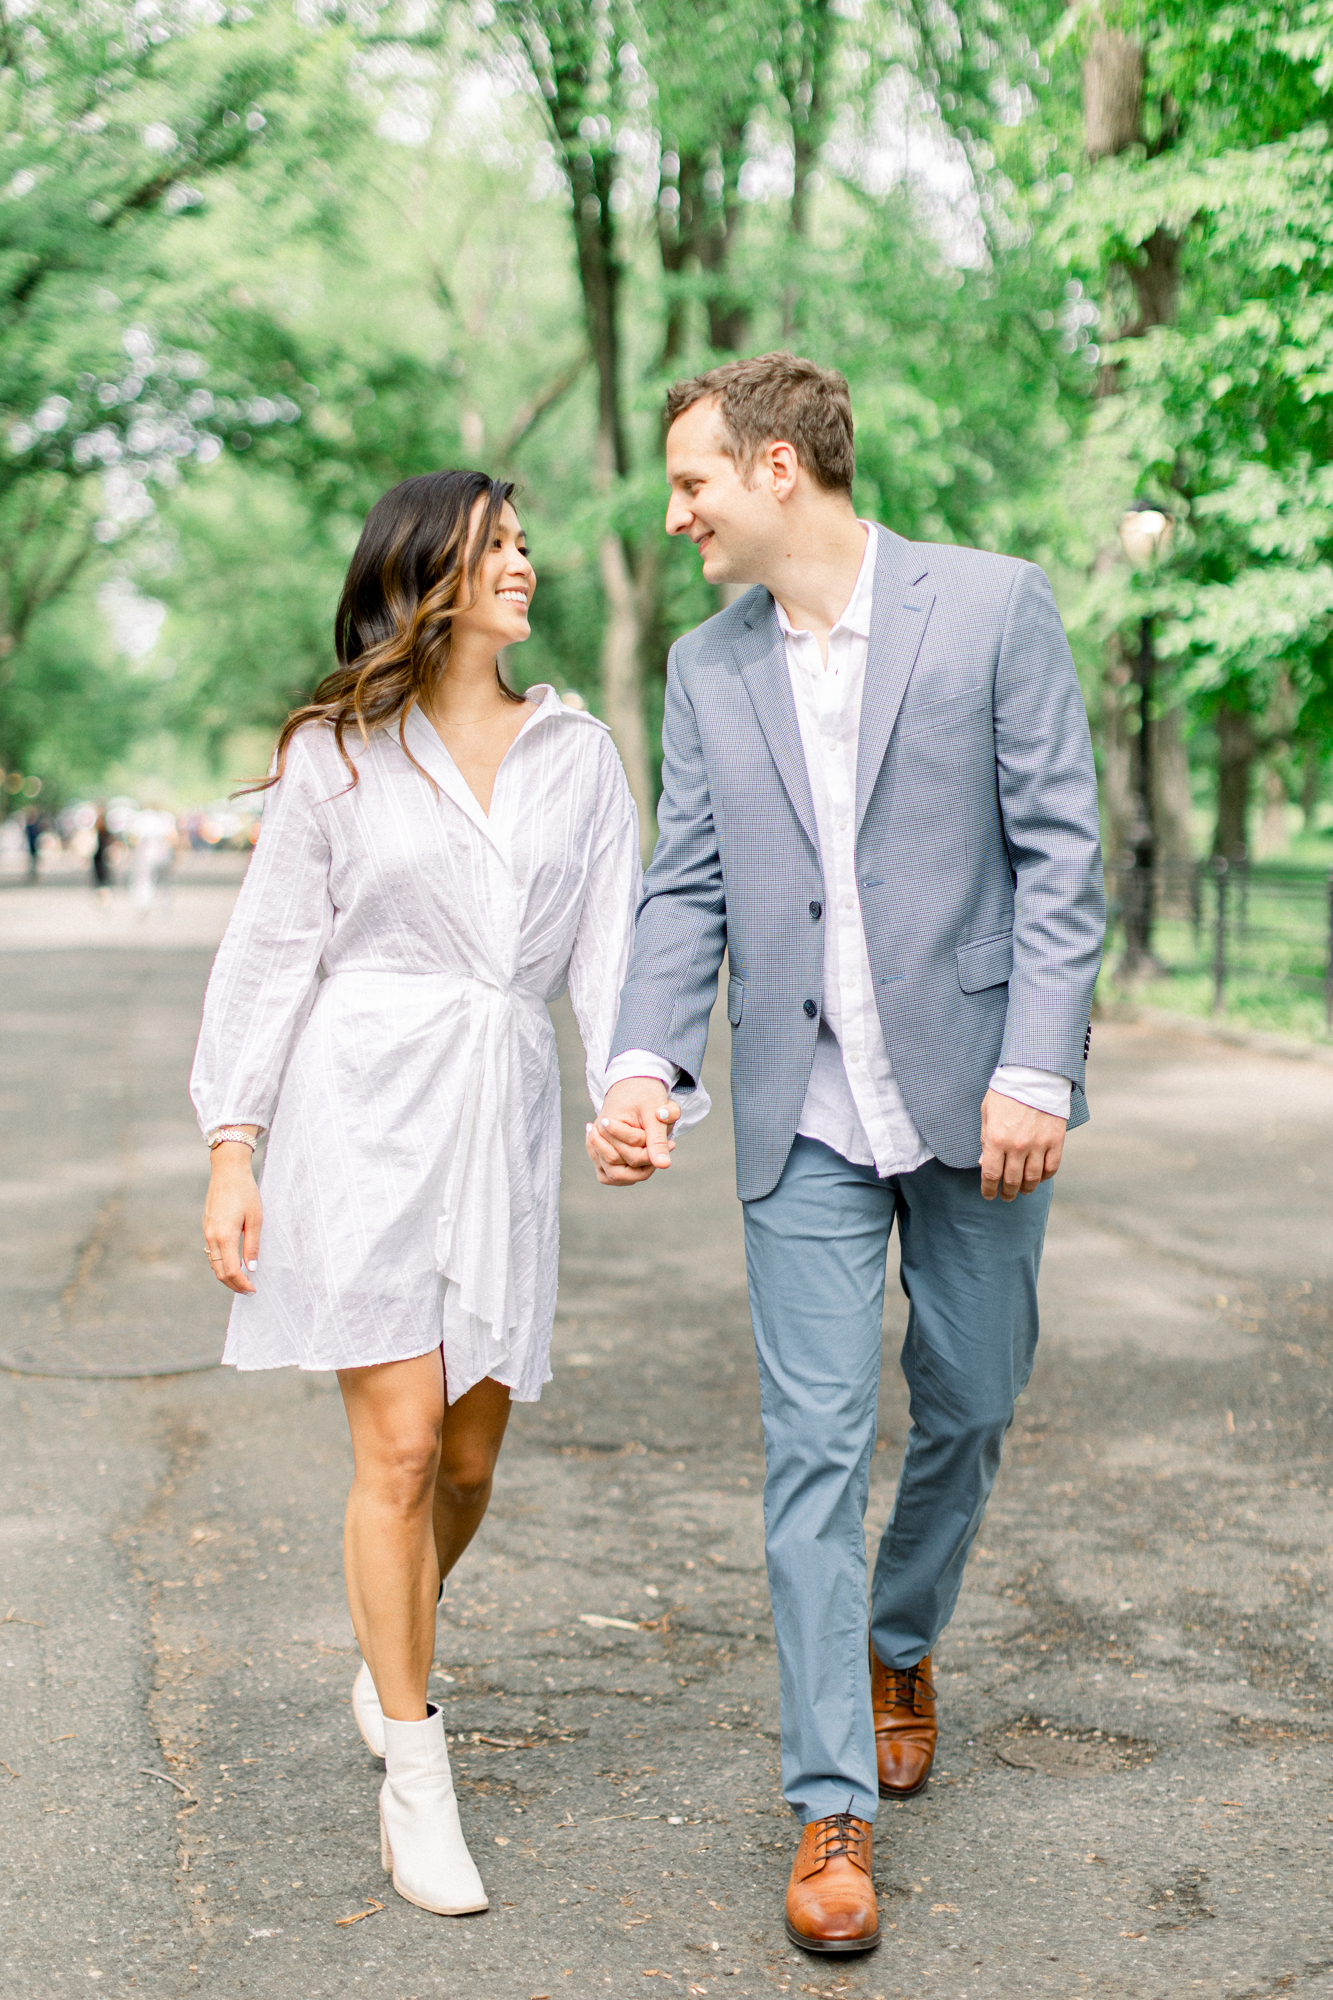 Fashionable Central Park Rowboat Engagement Photography in New York